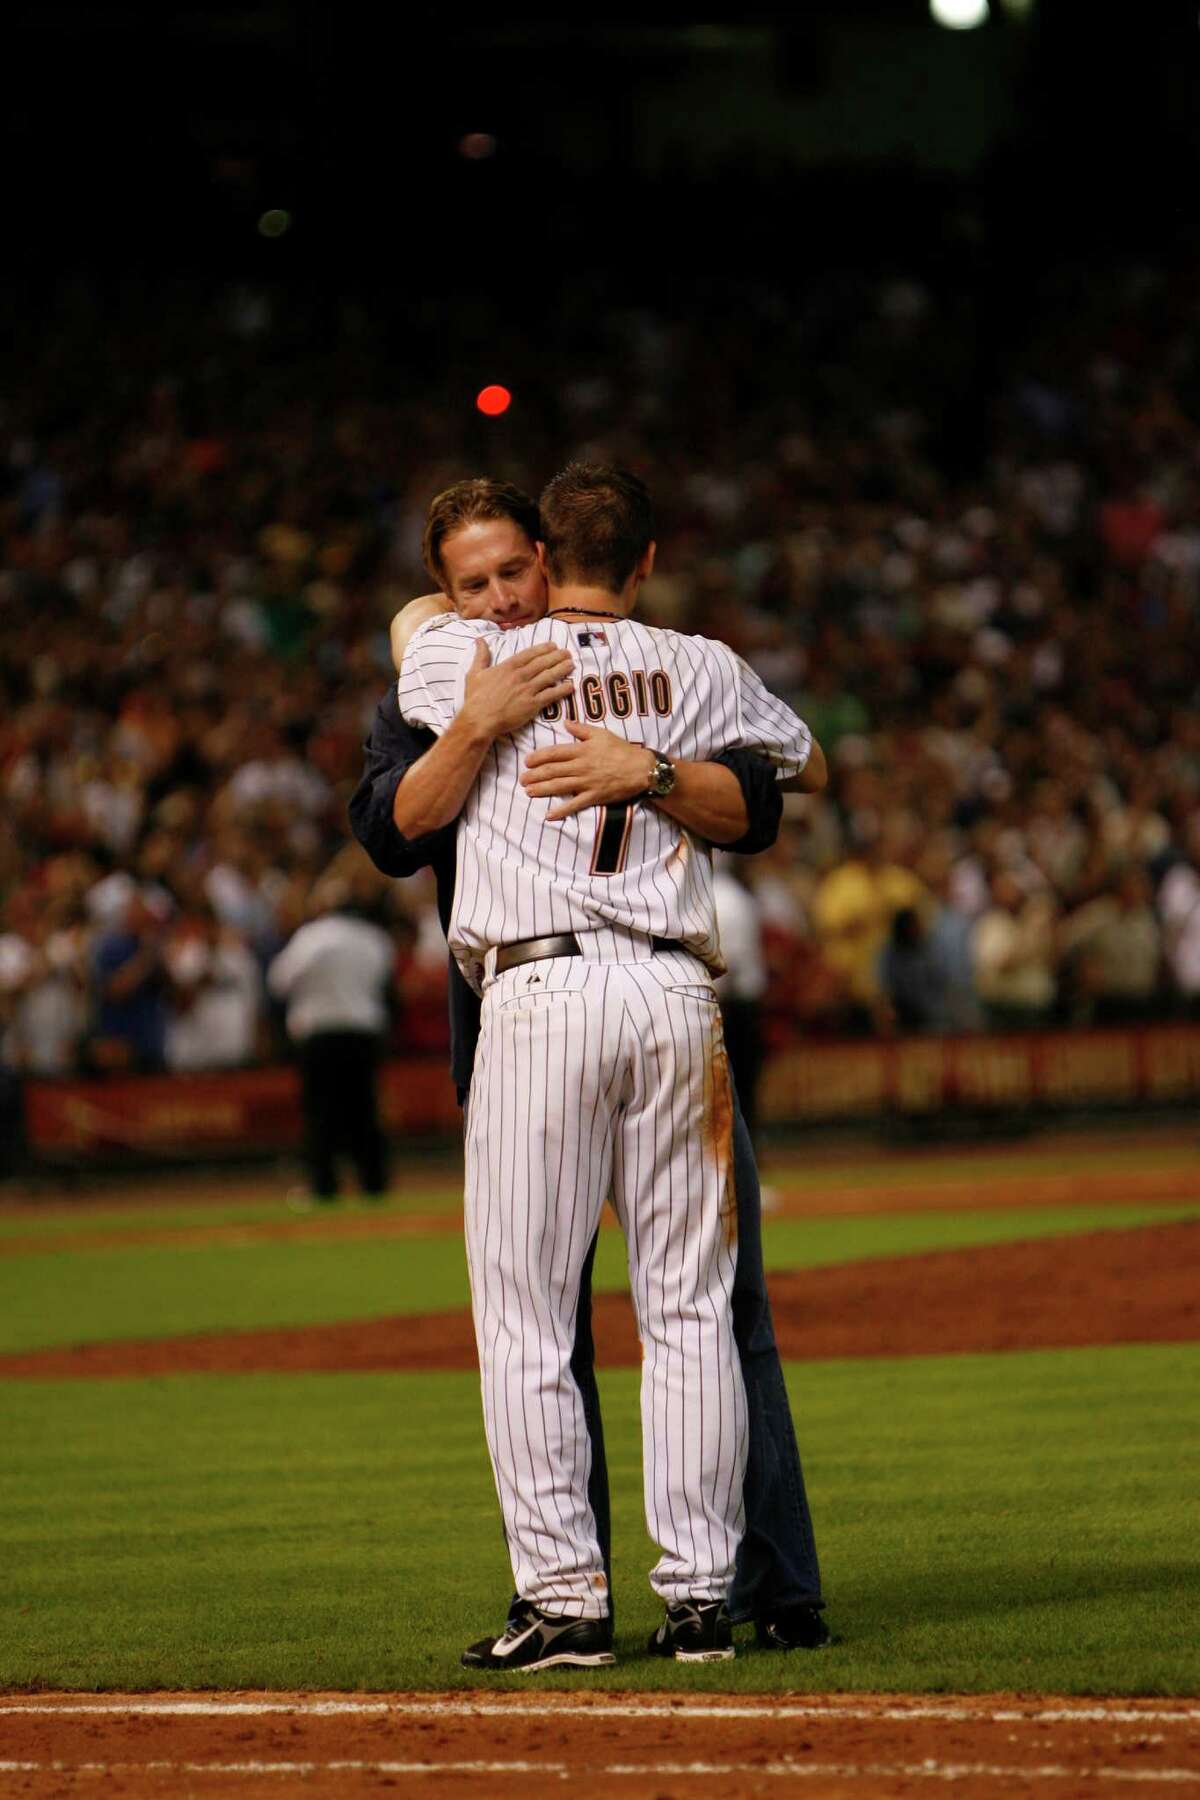 Craig Biggio celebrates with Jeff Bagwell after he singled off of Aaron Cook for the 3000th hit of his career during the seventh inning as the Houston Astros host the Colorado Rockies at Minute Maid Park in Houston, Thursday, June 28, 2007. ( Karen Warren / Chronicle ) "The thing with Baggy is that he and I worked so hard here for this city and for this organization," Biggio said. "We made so many sacrifices as far as playing the game and giving your body to a city, a team."